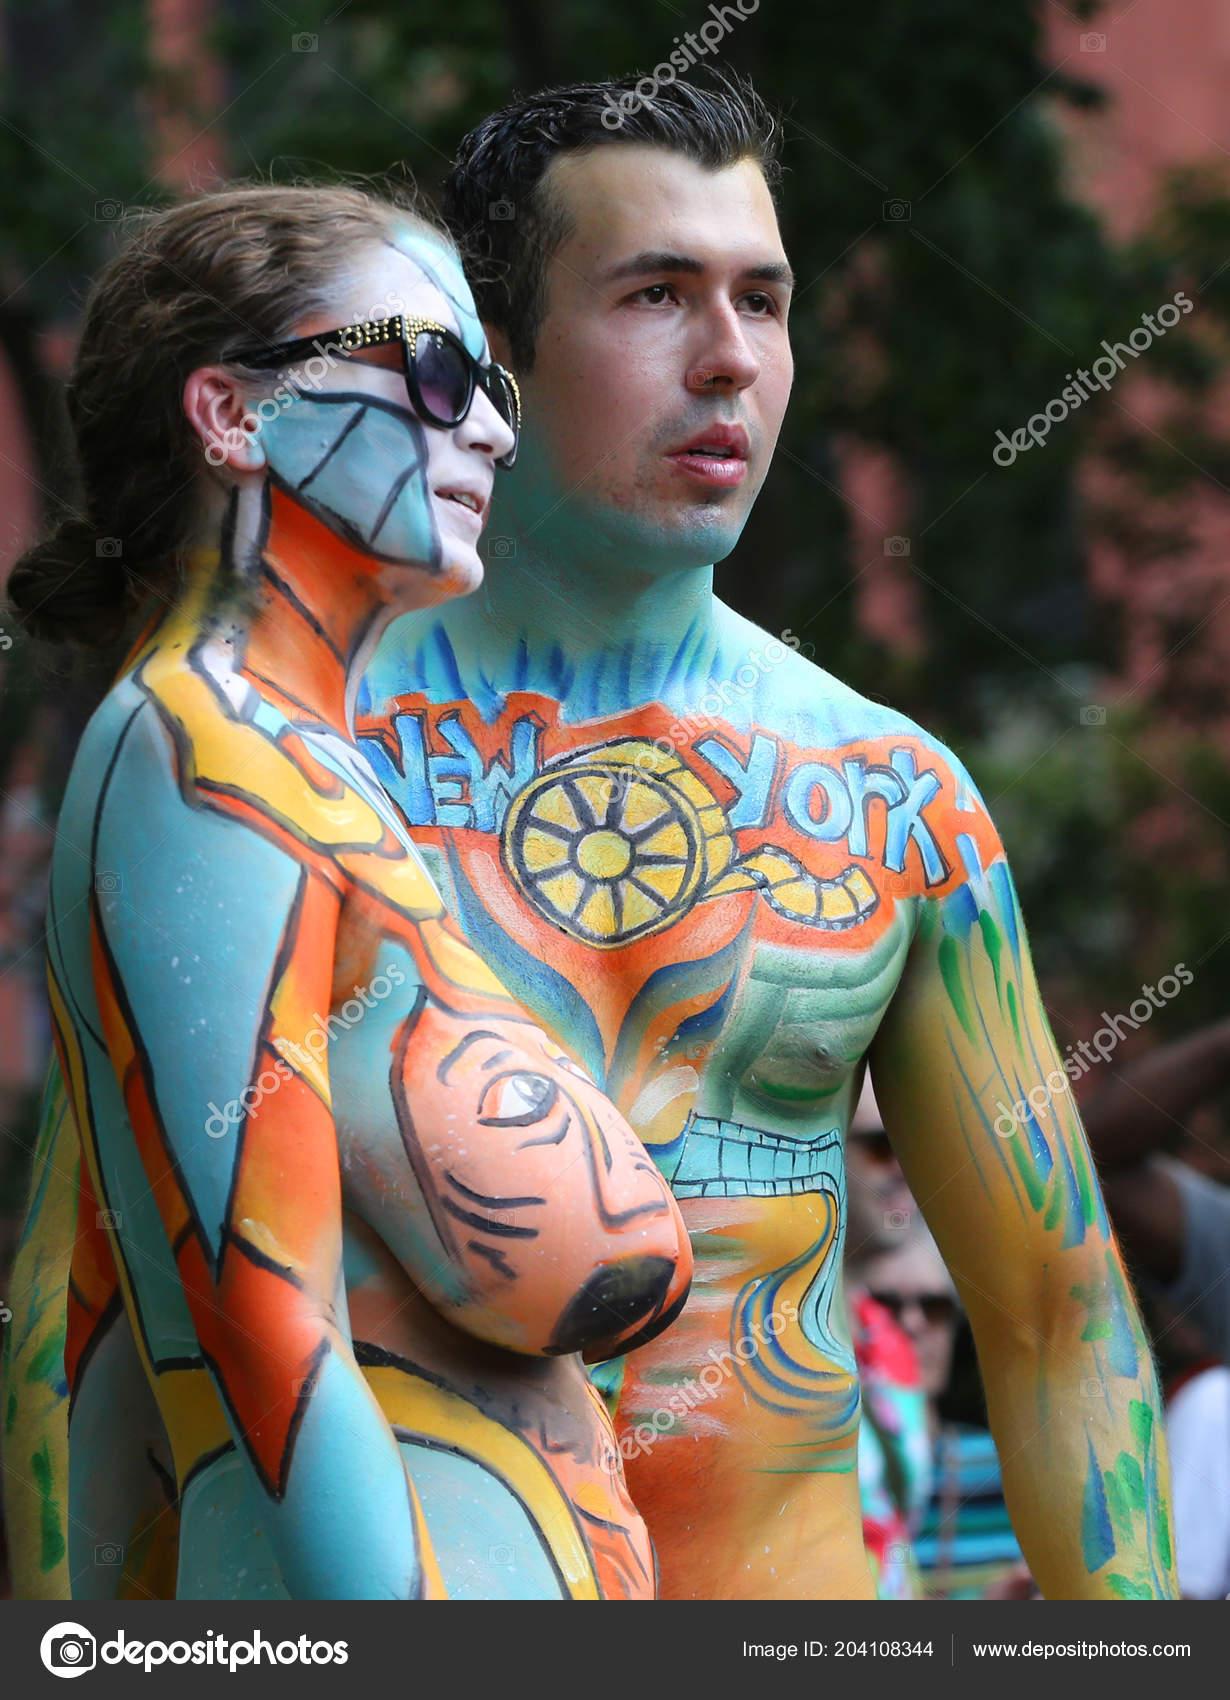 Patrol reccomend nude models body painting city